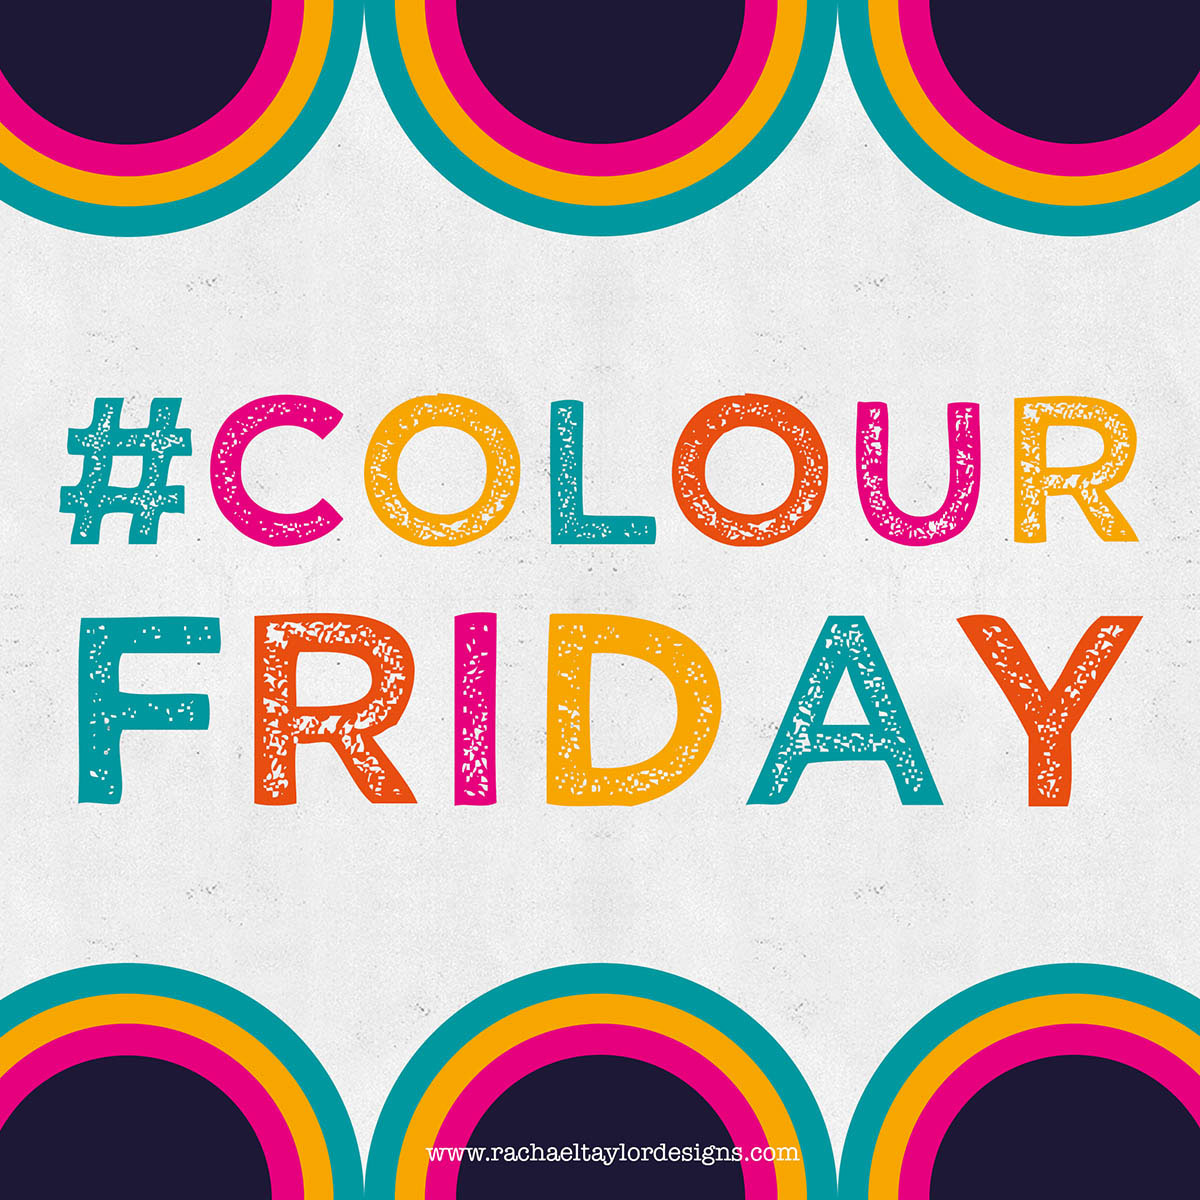 Celebrating #ColourFriday + supporting small business!